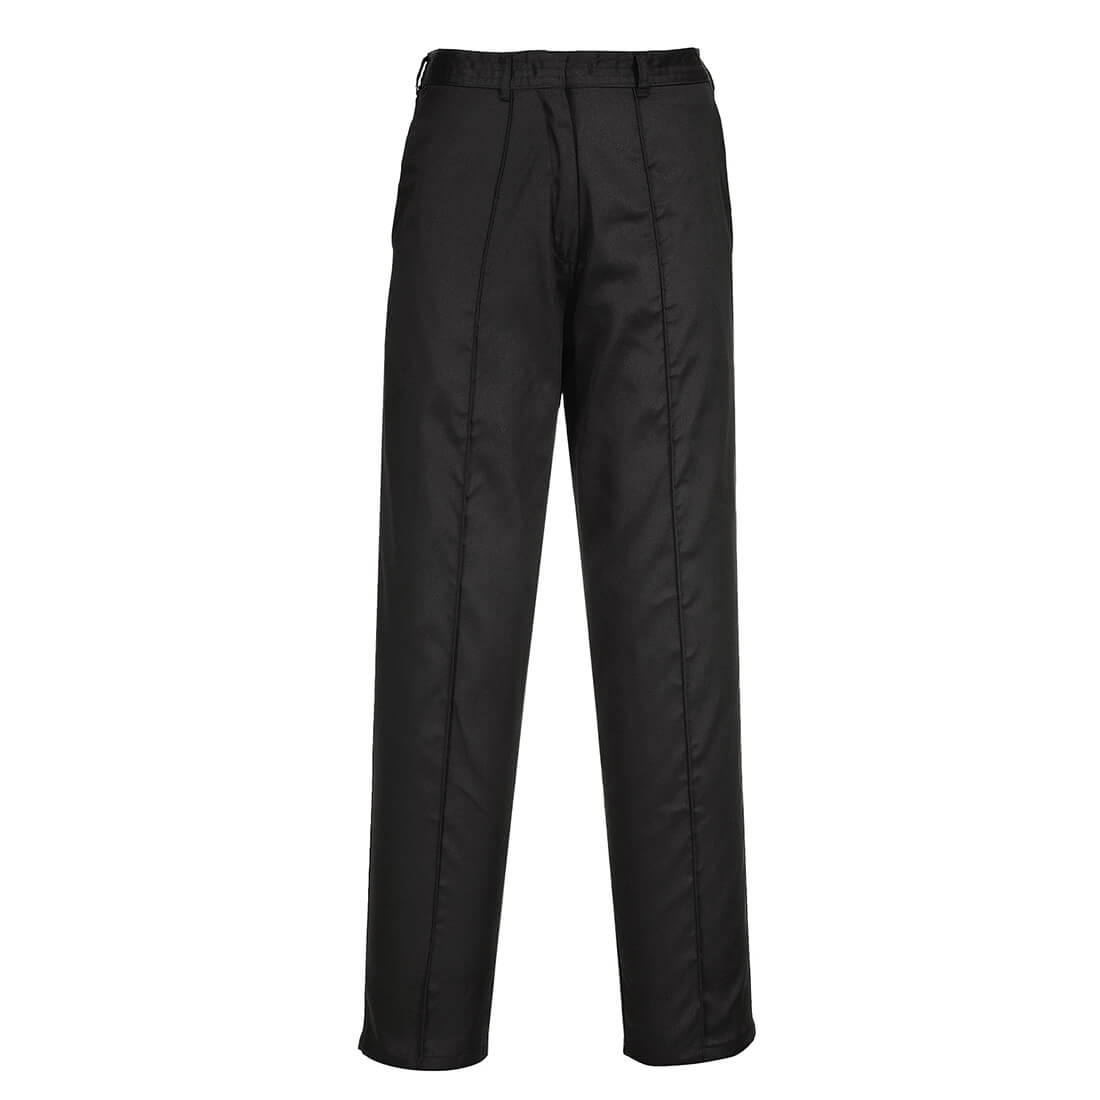 Image of Portwest LW97 ladies Elasticated Trousers Black XL 31"